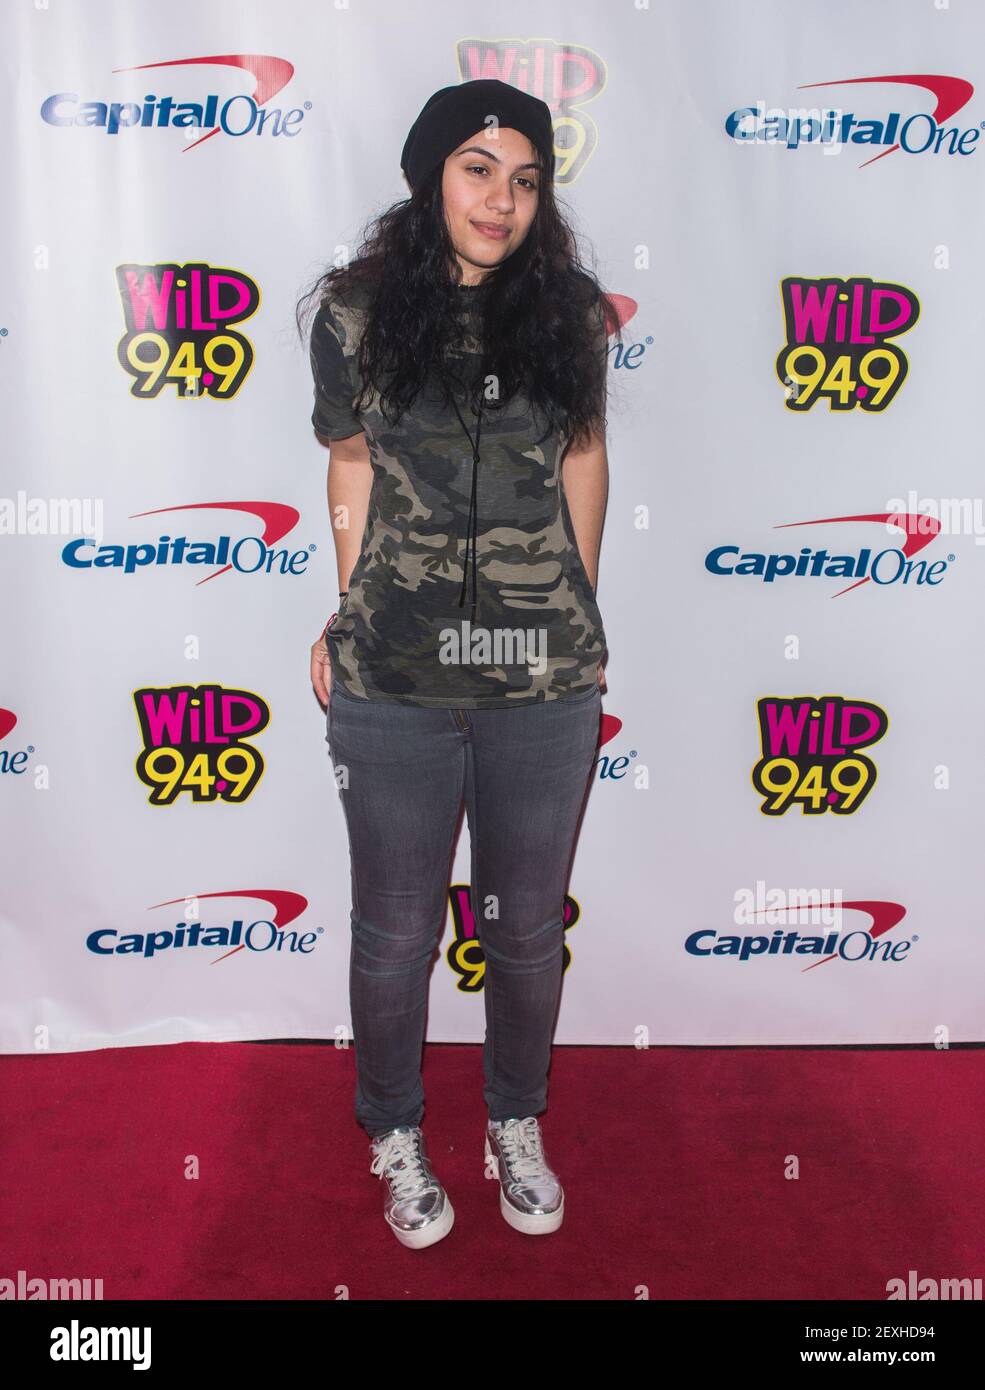 Recording artist Alessia Cara poses in the press room during the WiLD 94.9 iHeartRadio Jingle Ball at SAP Center on December 1, 2016 in San Jose, California.(Photo by Chris Tuite/ImageSPACE) *** Please Use Credit from Credit Field *** Stock Photo